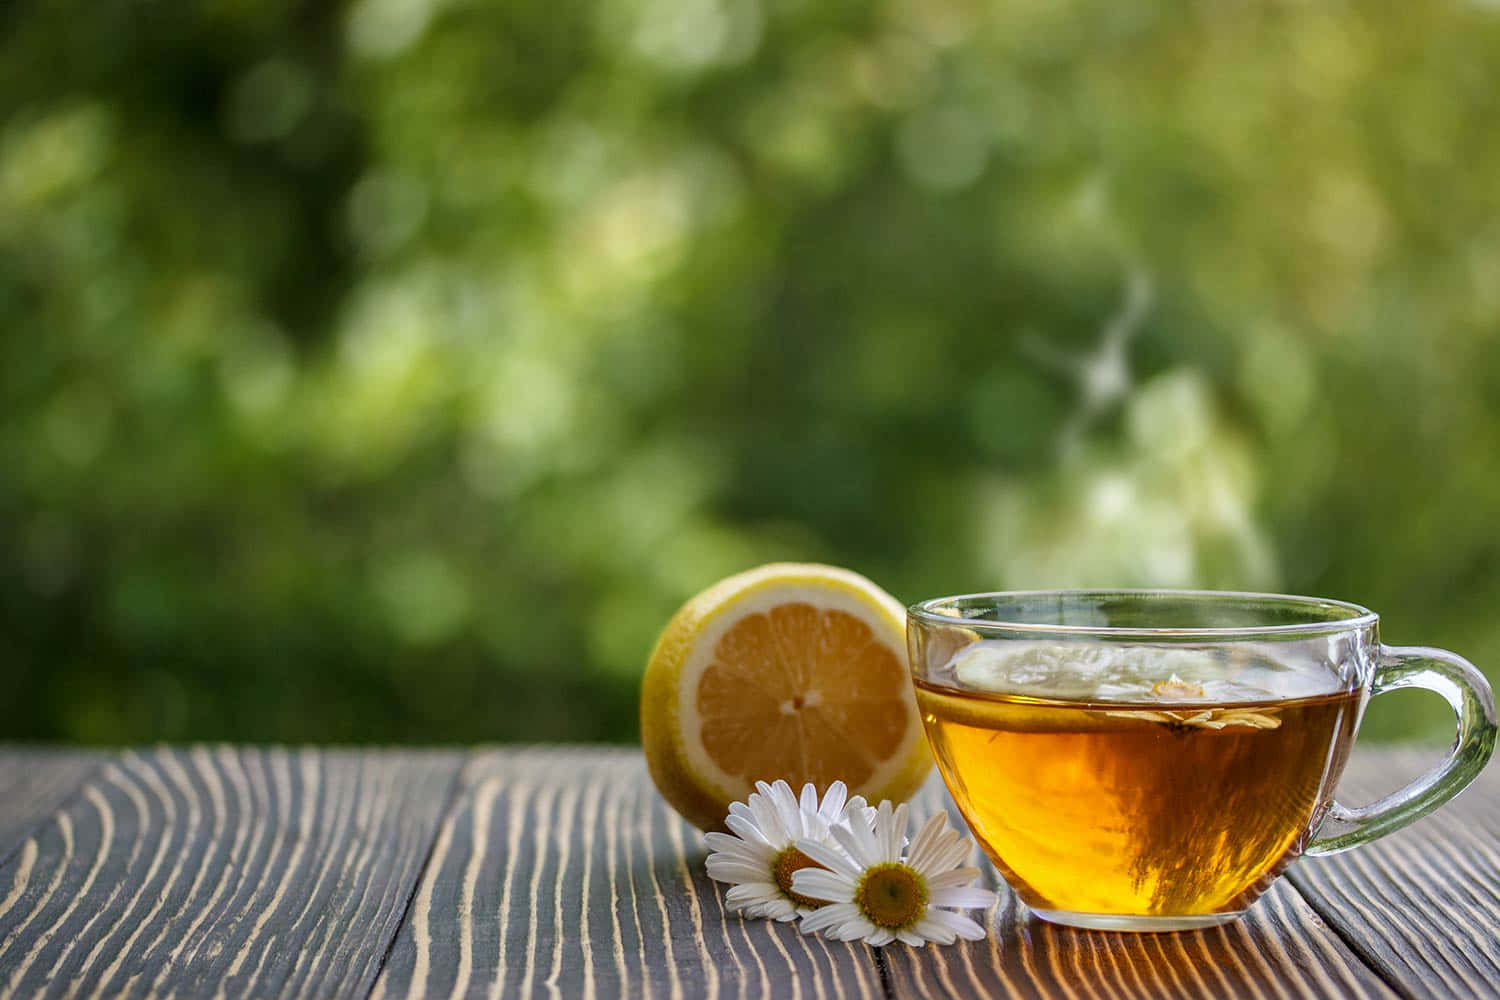 A Cup Of Tea With Lemon And Daisies On A Wooden Table